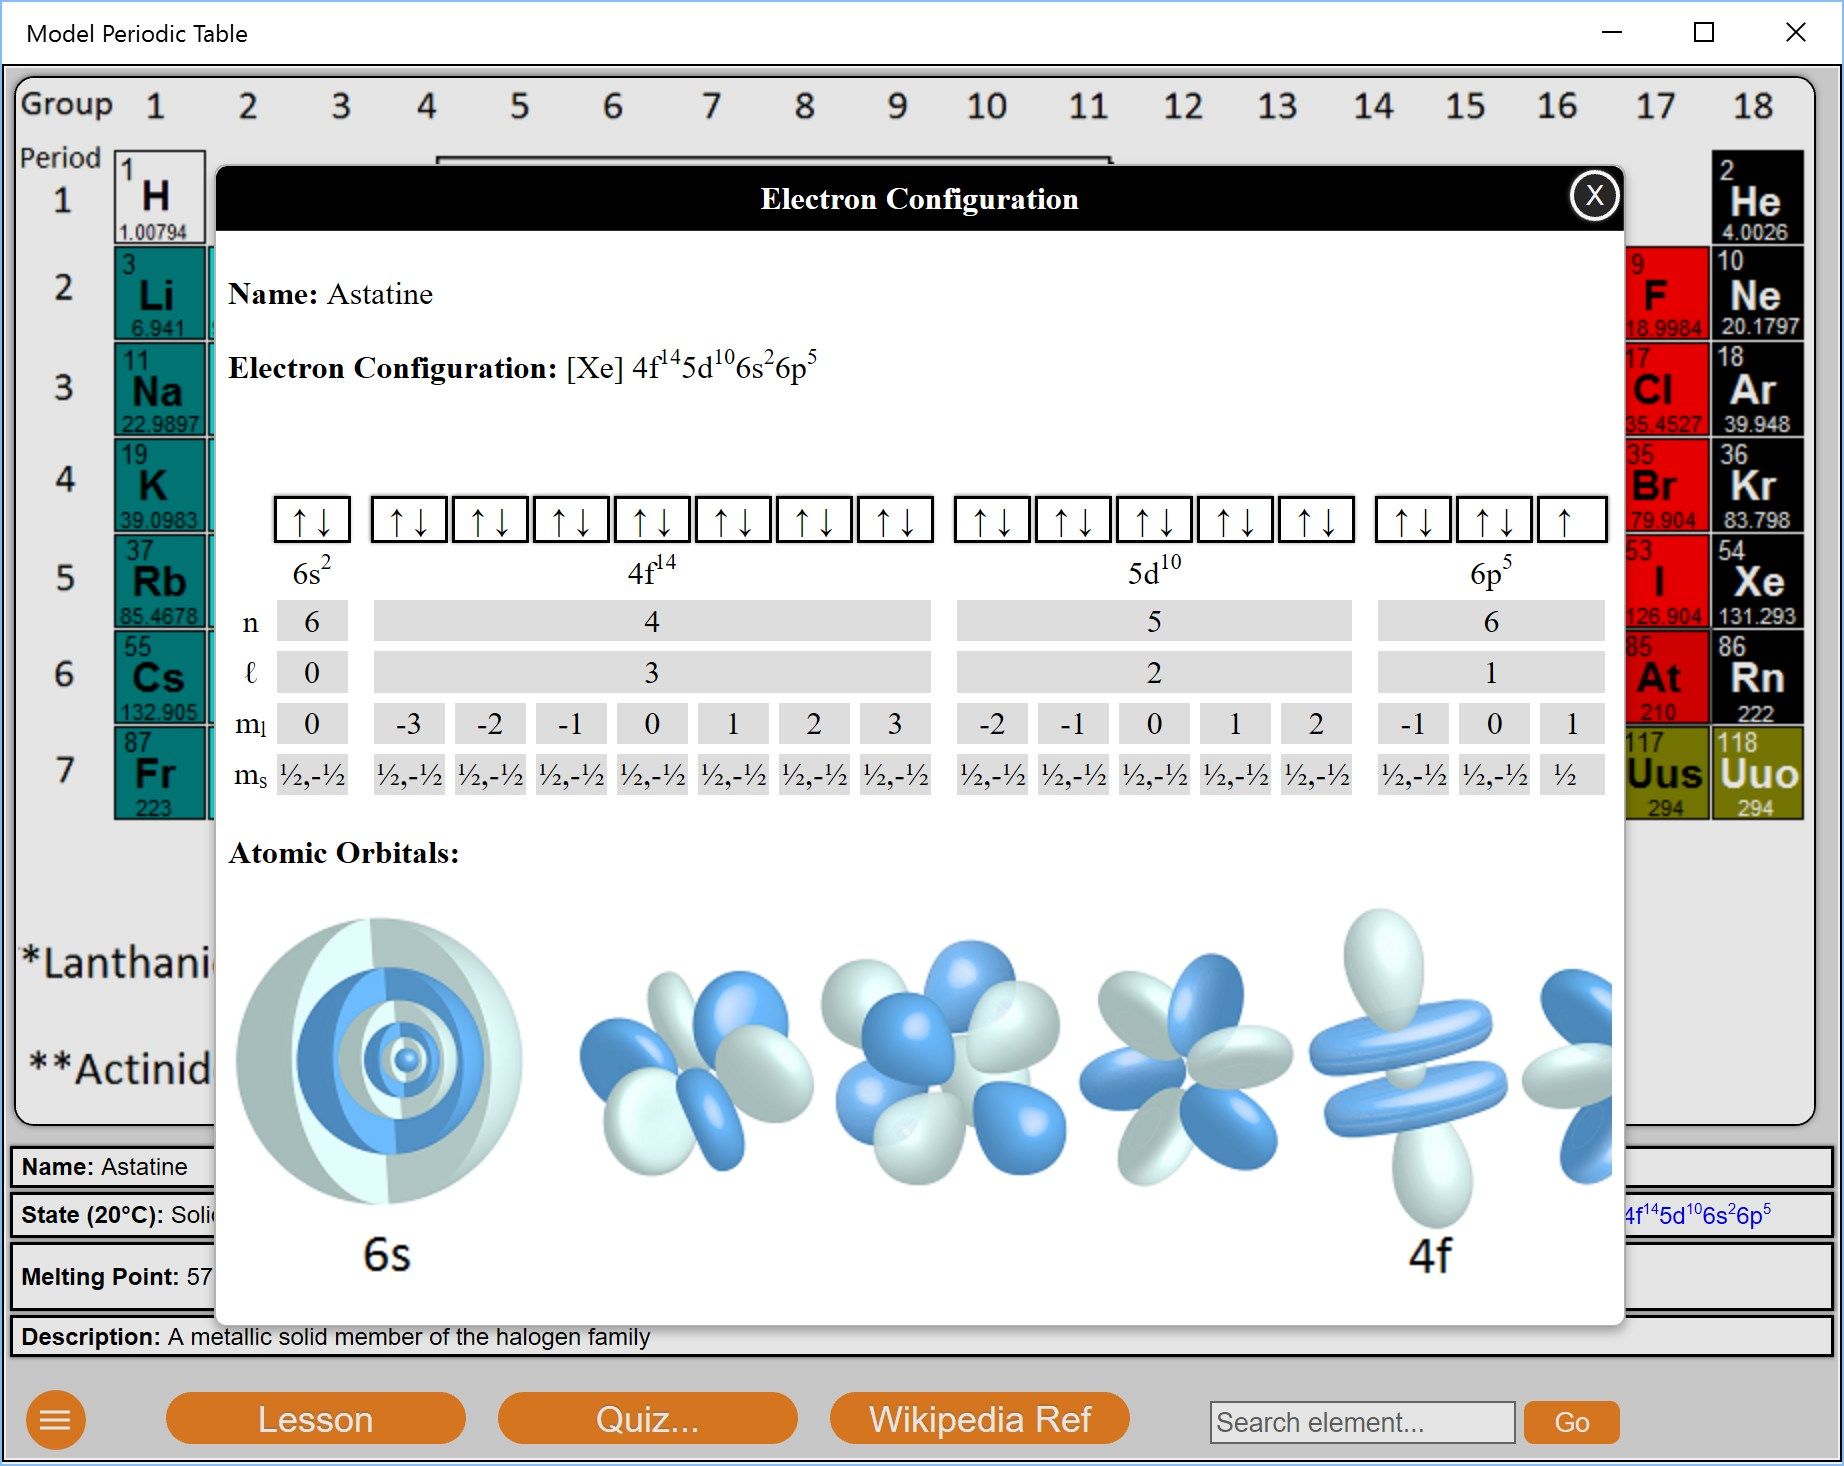 Electron Configuration view with 3D orbital Visualizations.